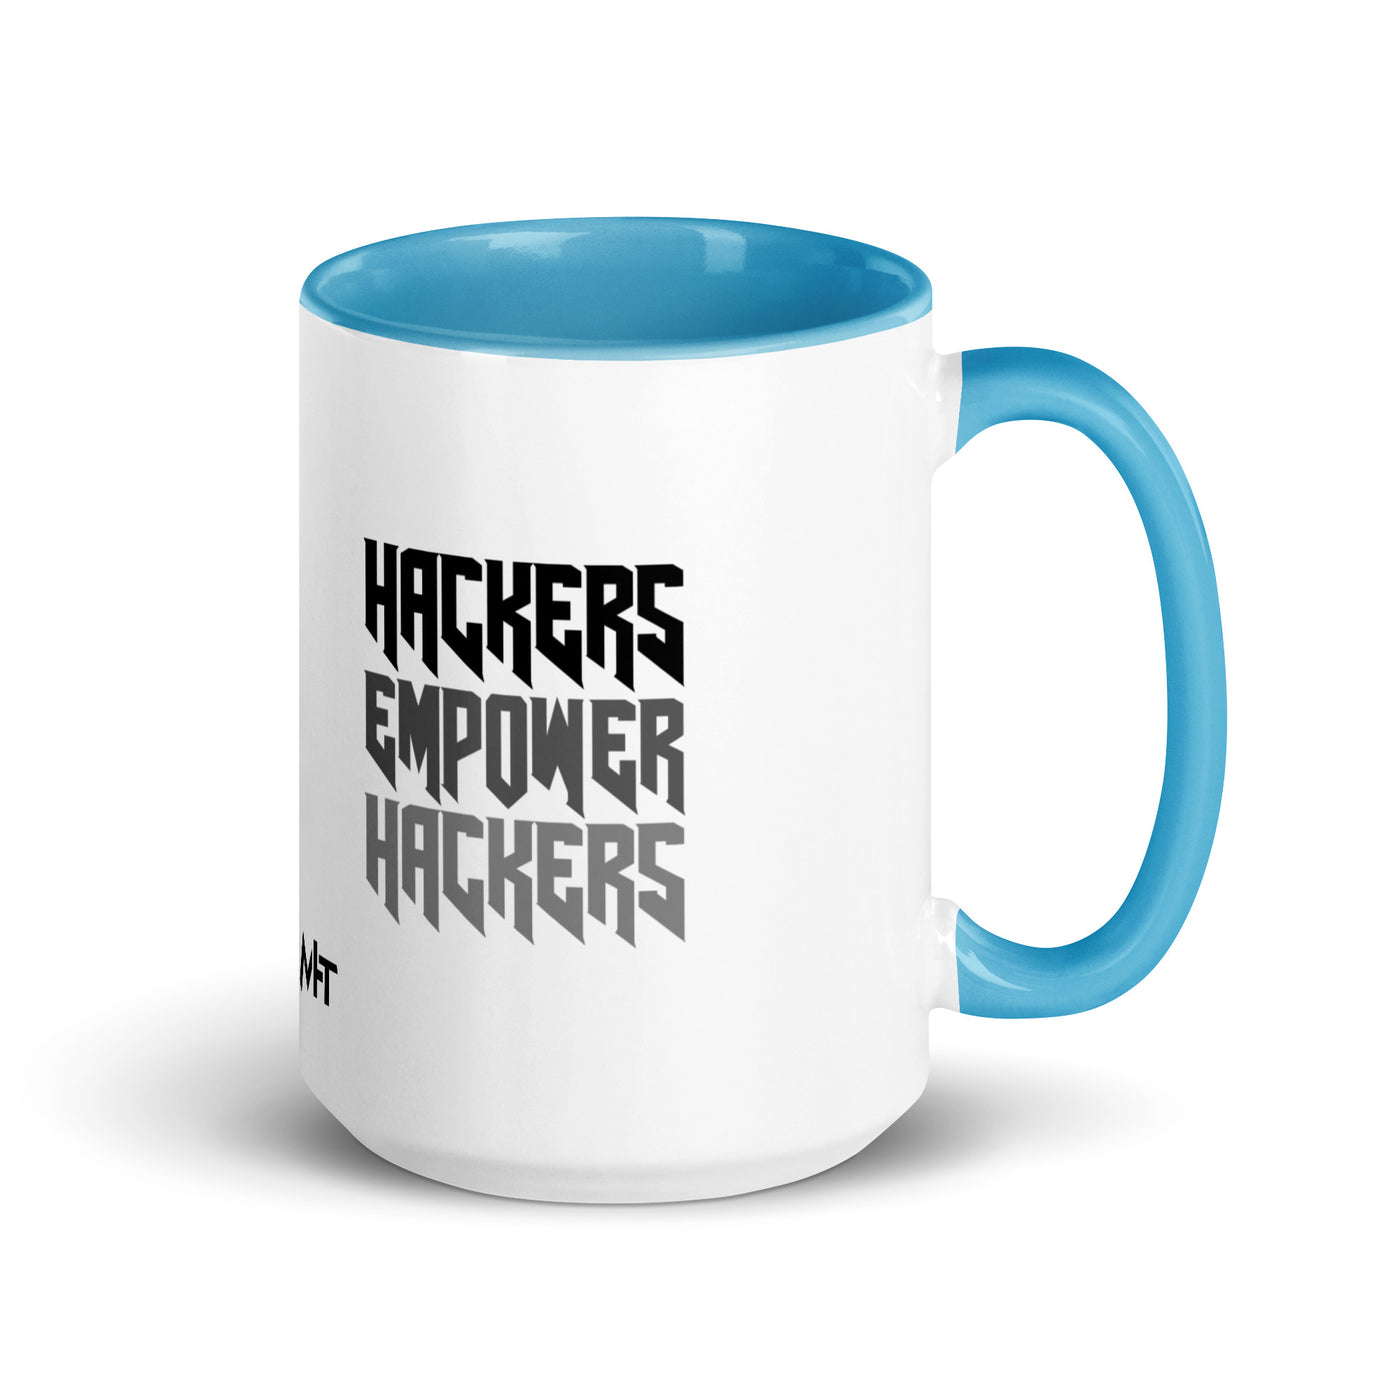 Hackers Empower Hackers V4 - Mug with Color Inside